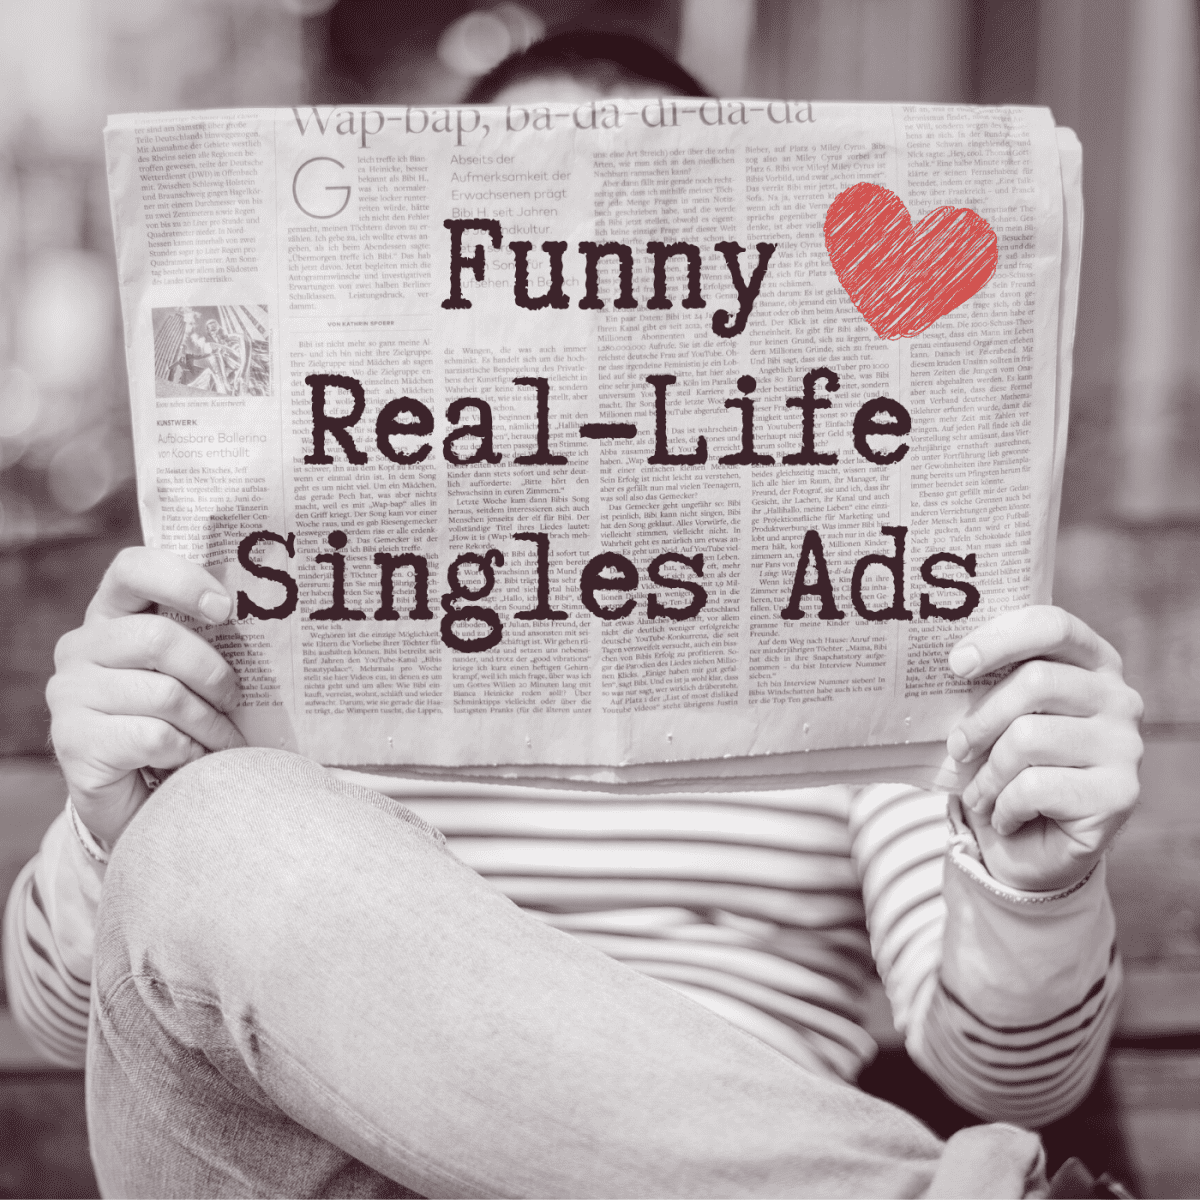 Dating ads examples